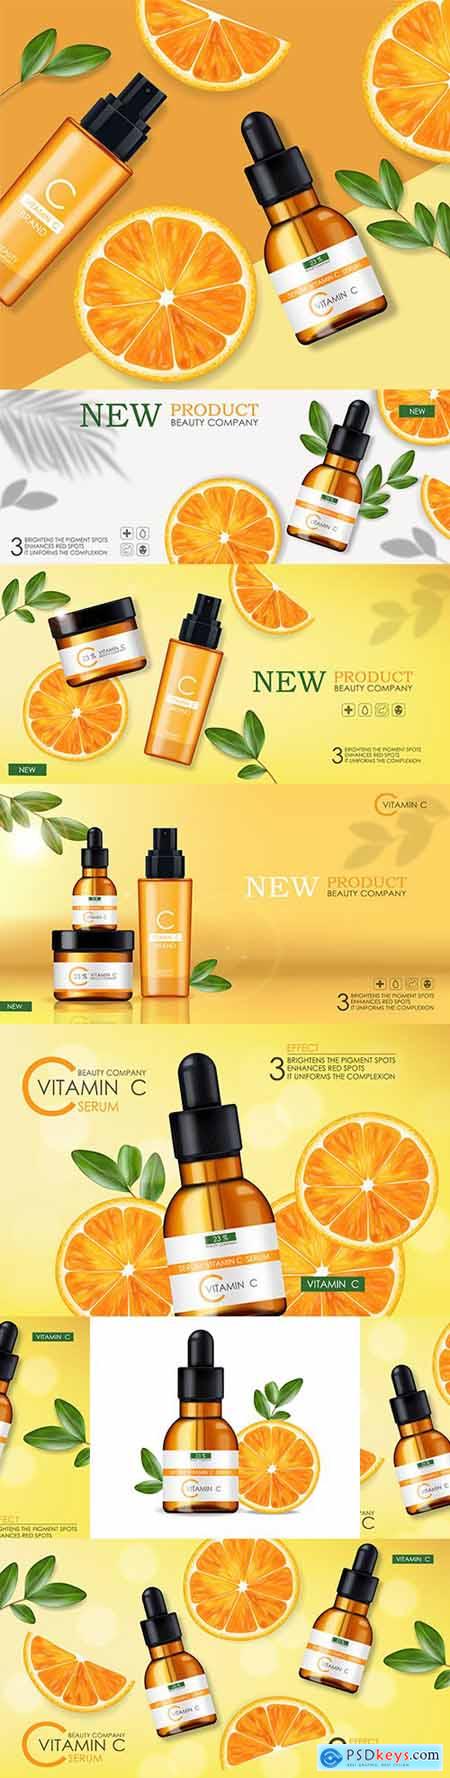 Vitamins cream and whey bottle for skin care, realistic packaging